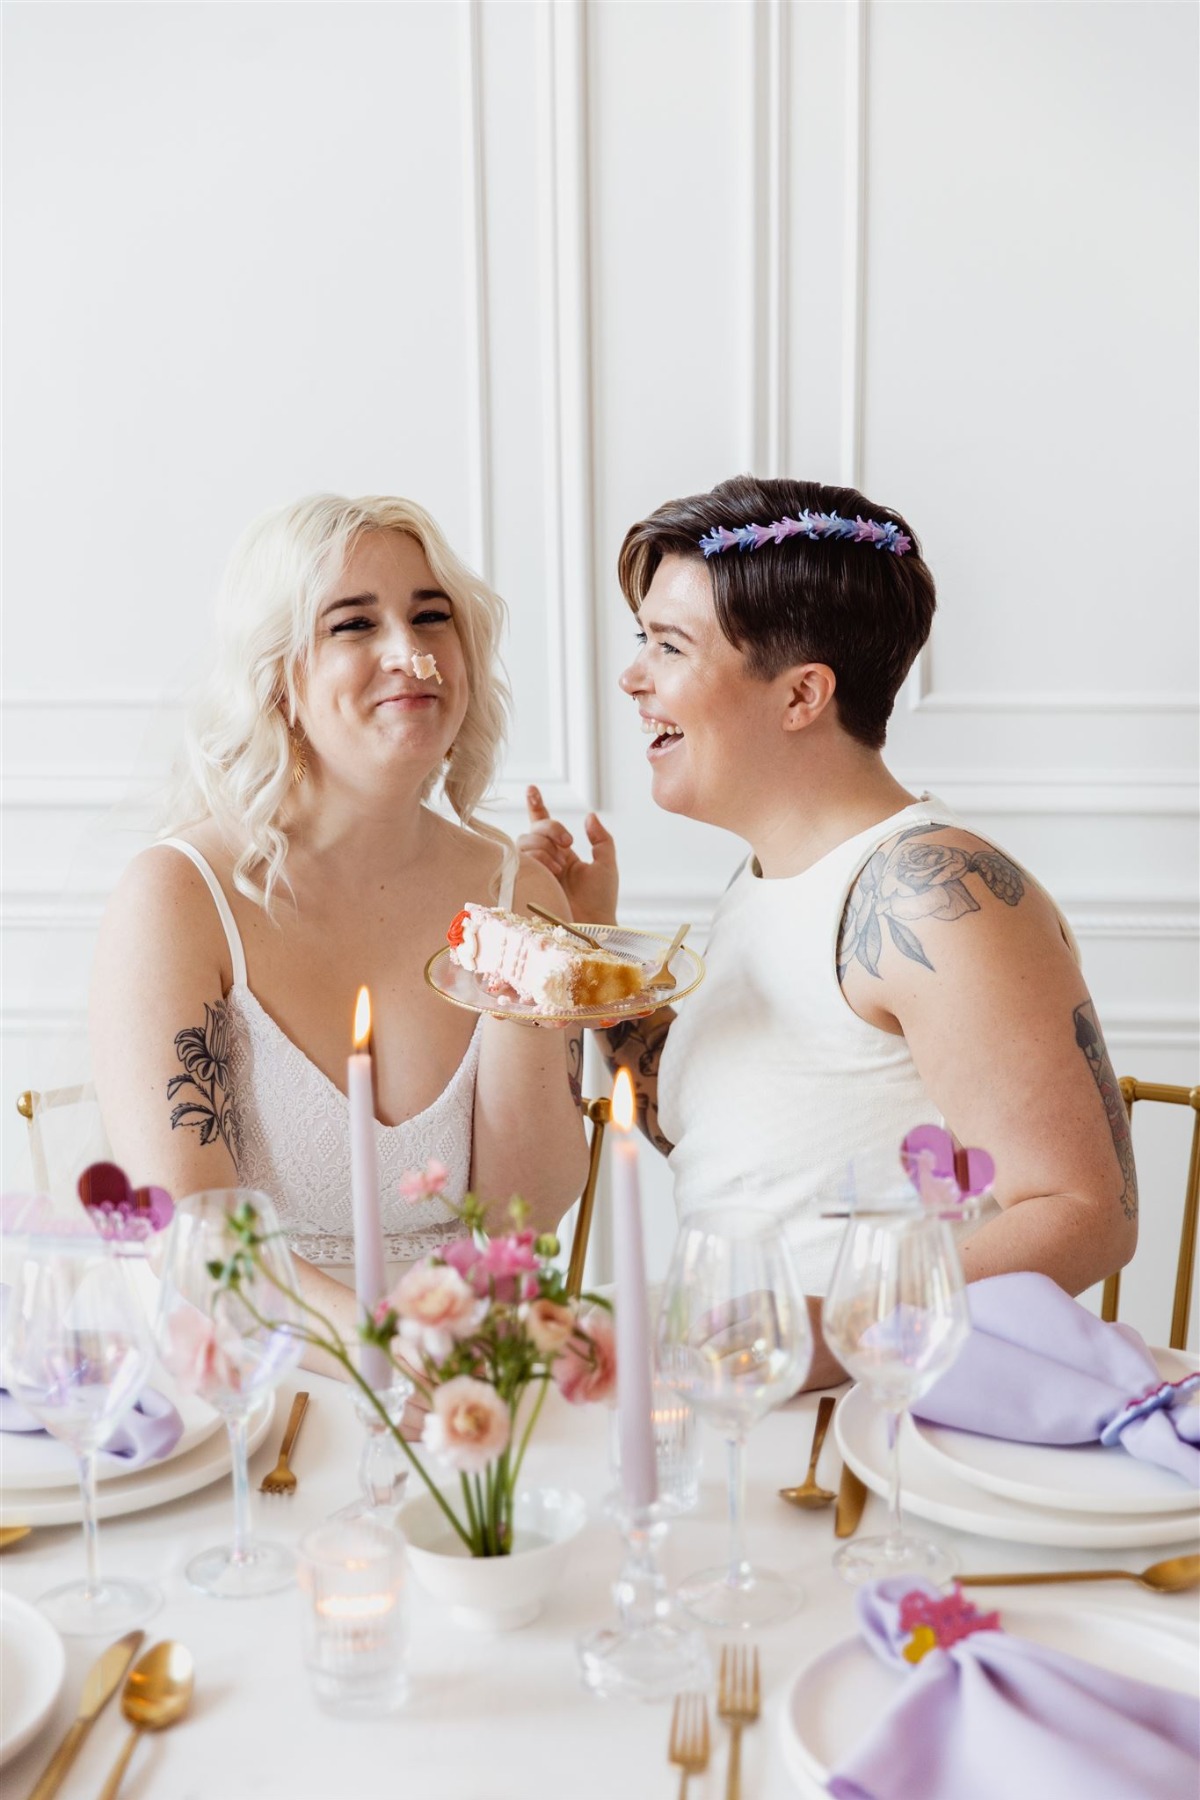 Queer couple cake exchange 